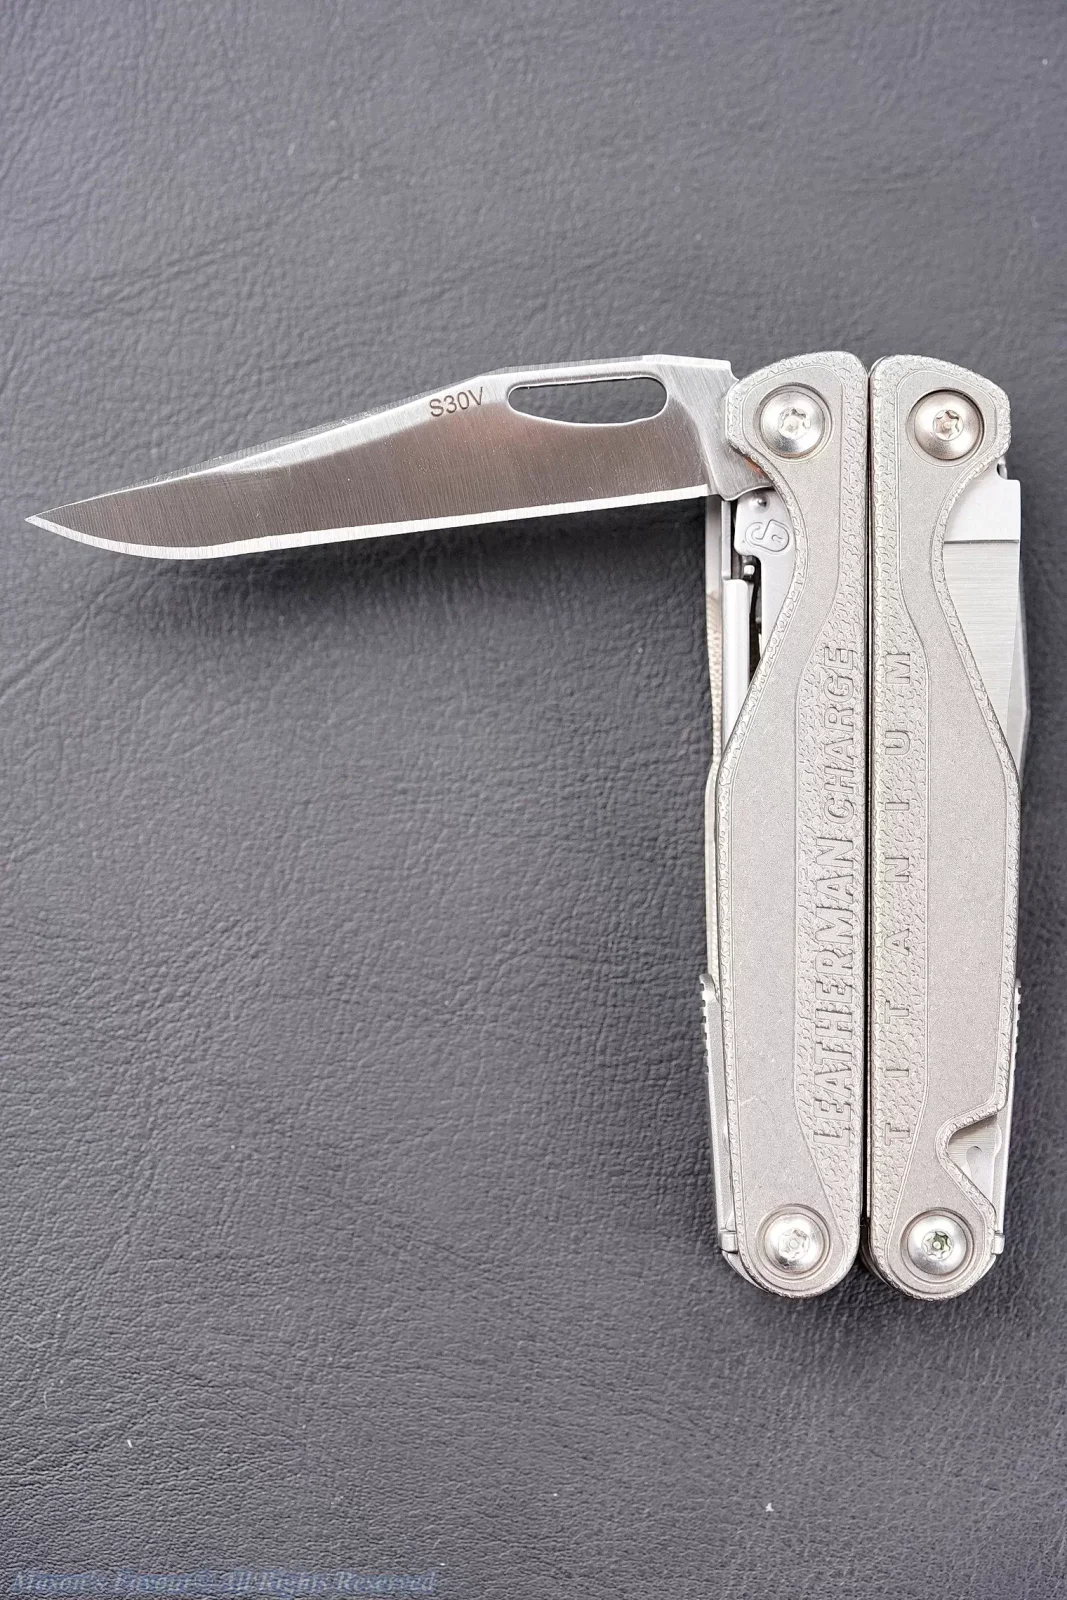 Leatherman Charge+ TTI - S30V Knife, being opened